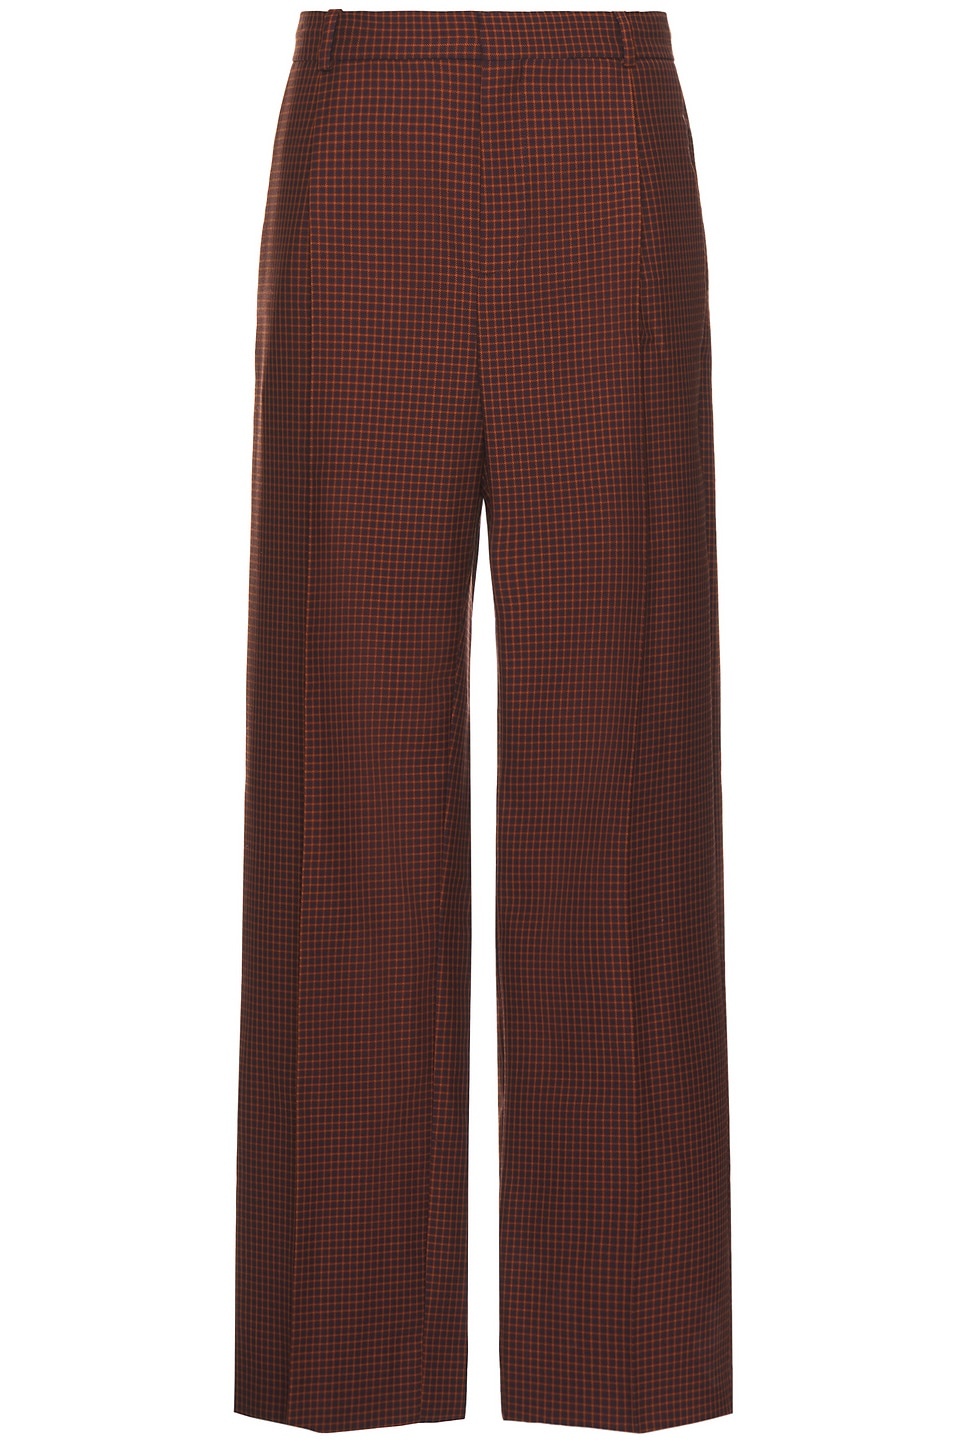 Classic Trousers With Pleat - 1